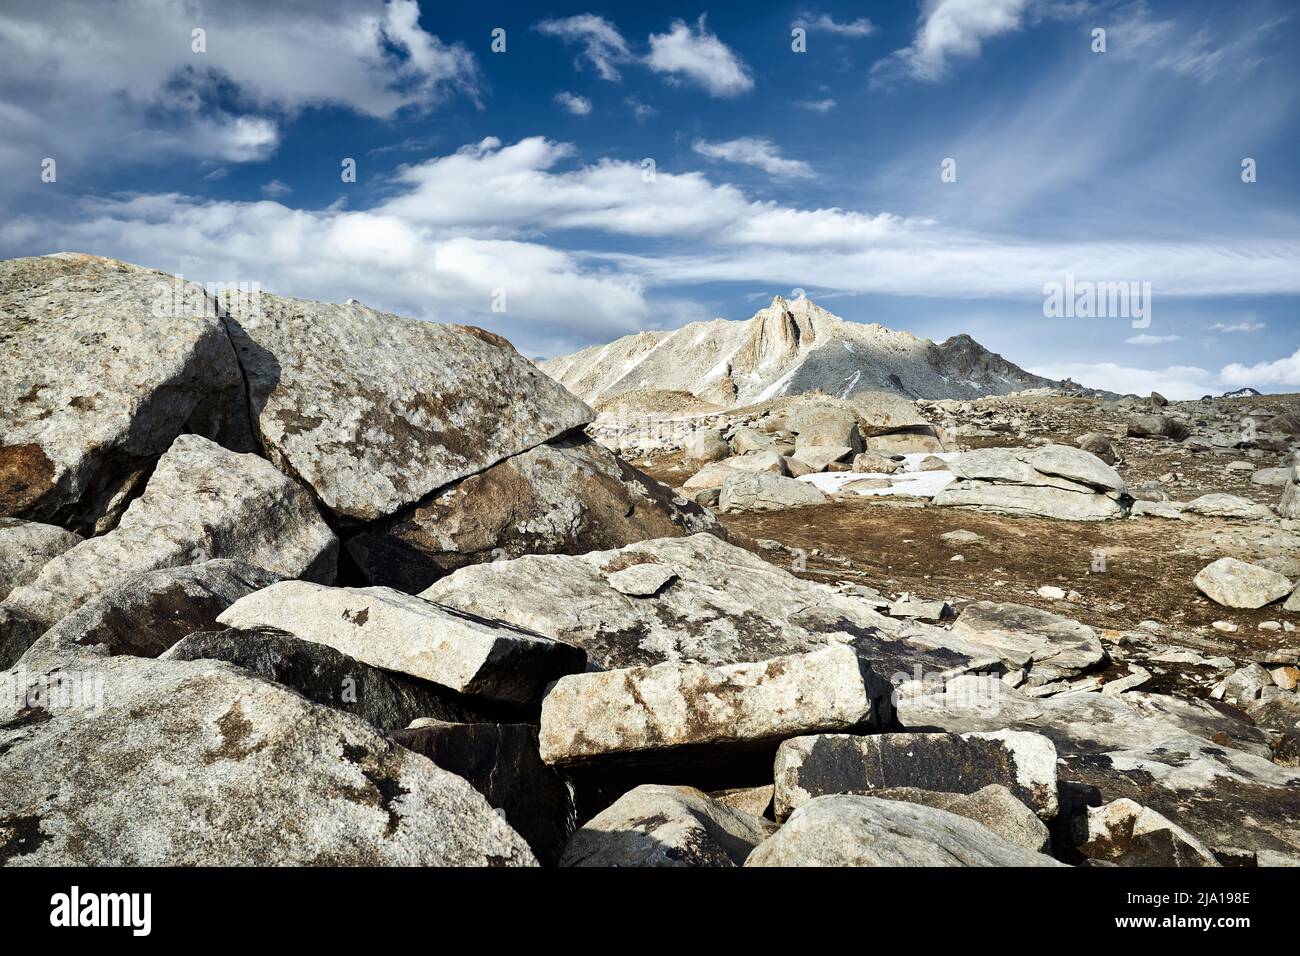 Beautiful scenery of the big rocky mountain at cloudy blue in Tien Shan, Kazakhstan. Stock Photo